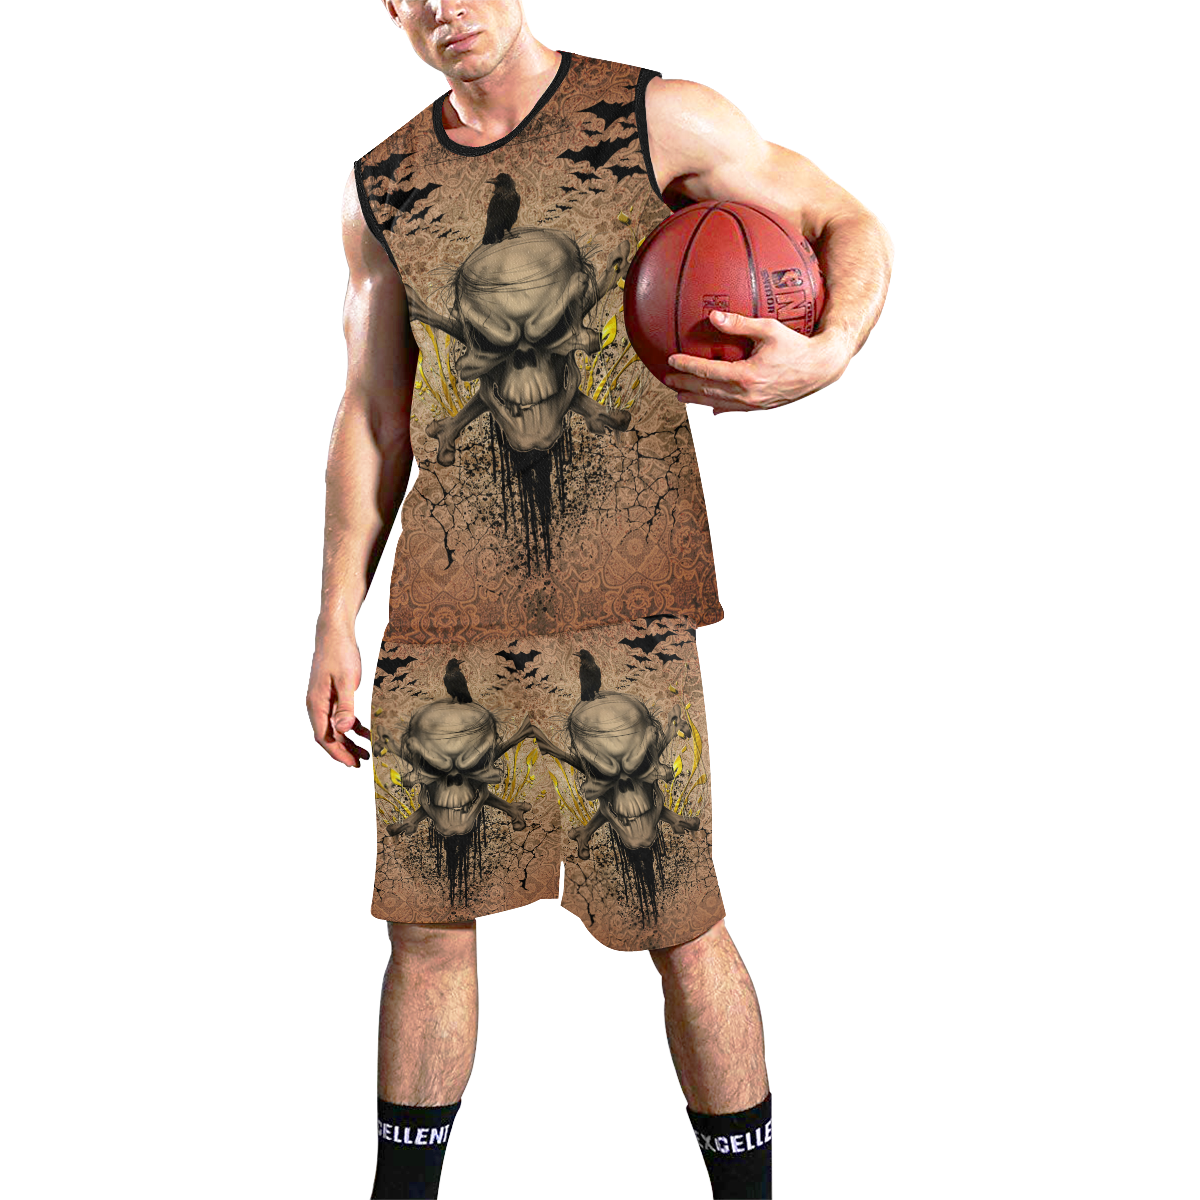 The scary skull with crow All Over Print Basketball Uniform